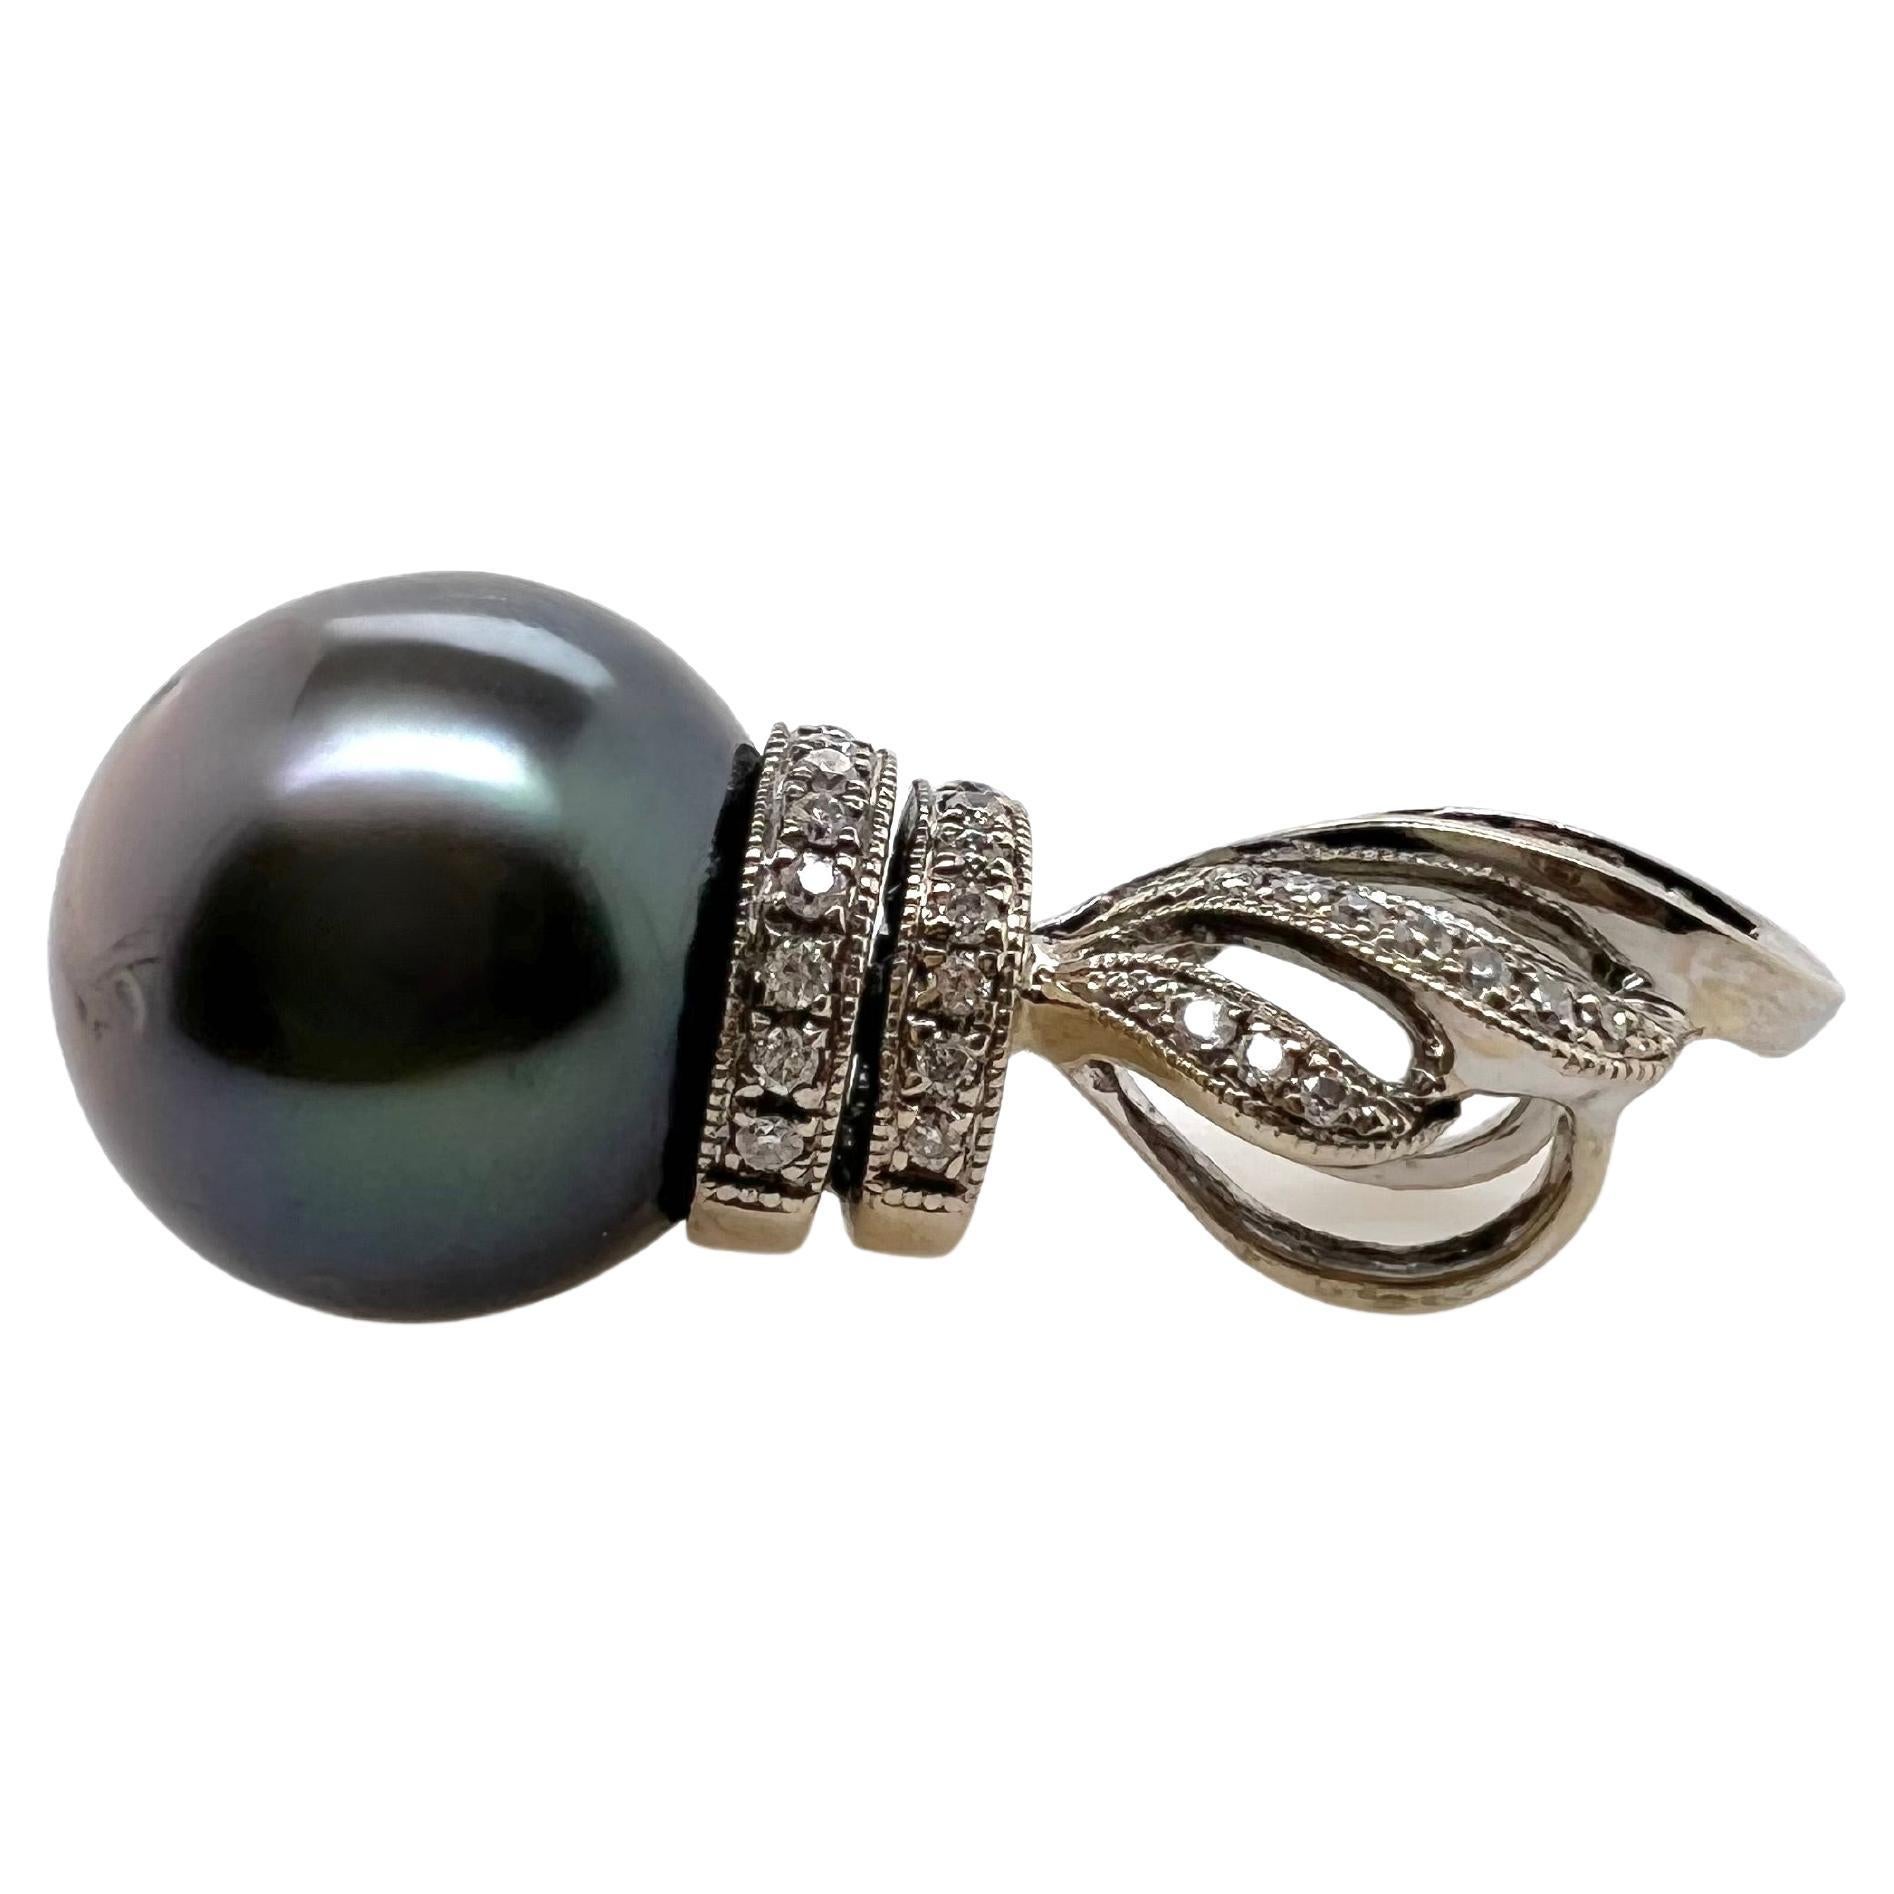 This gorgeous 18k white gold setting truly complements the 13mm Tahitian pearl in a contemporary design.  The baguette and brilliant round diamonds are artistically arranged white the pearl is set at the base to finish off the exquisite